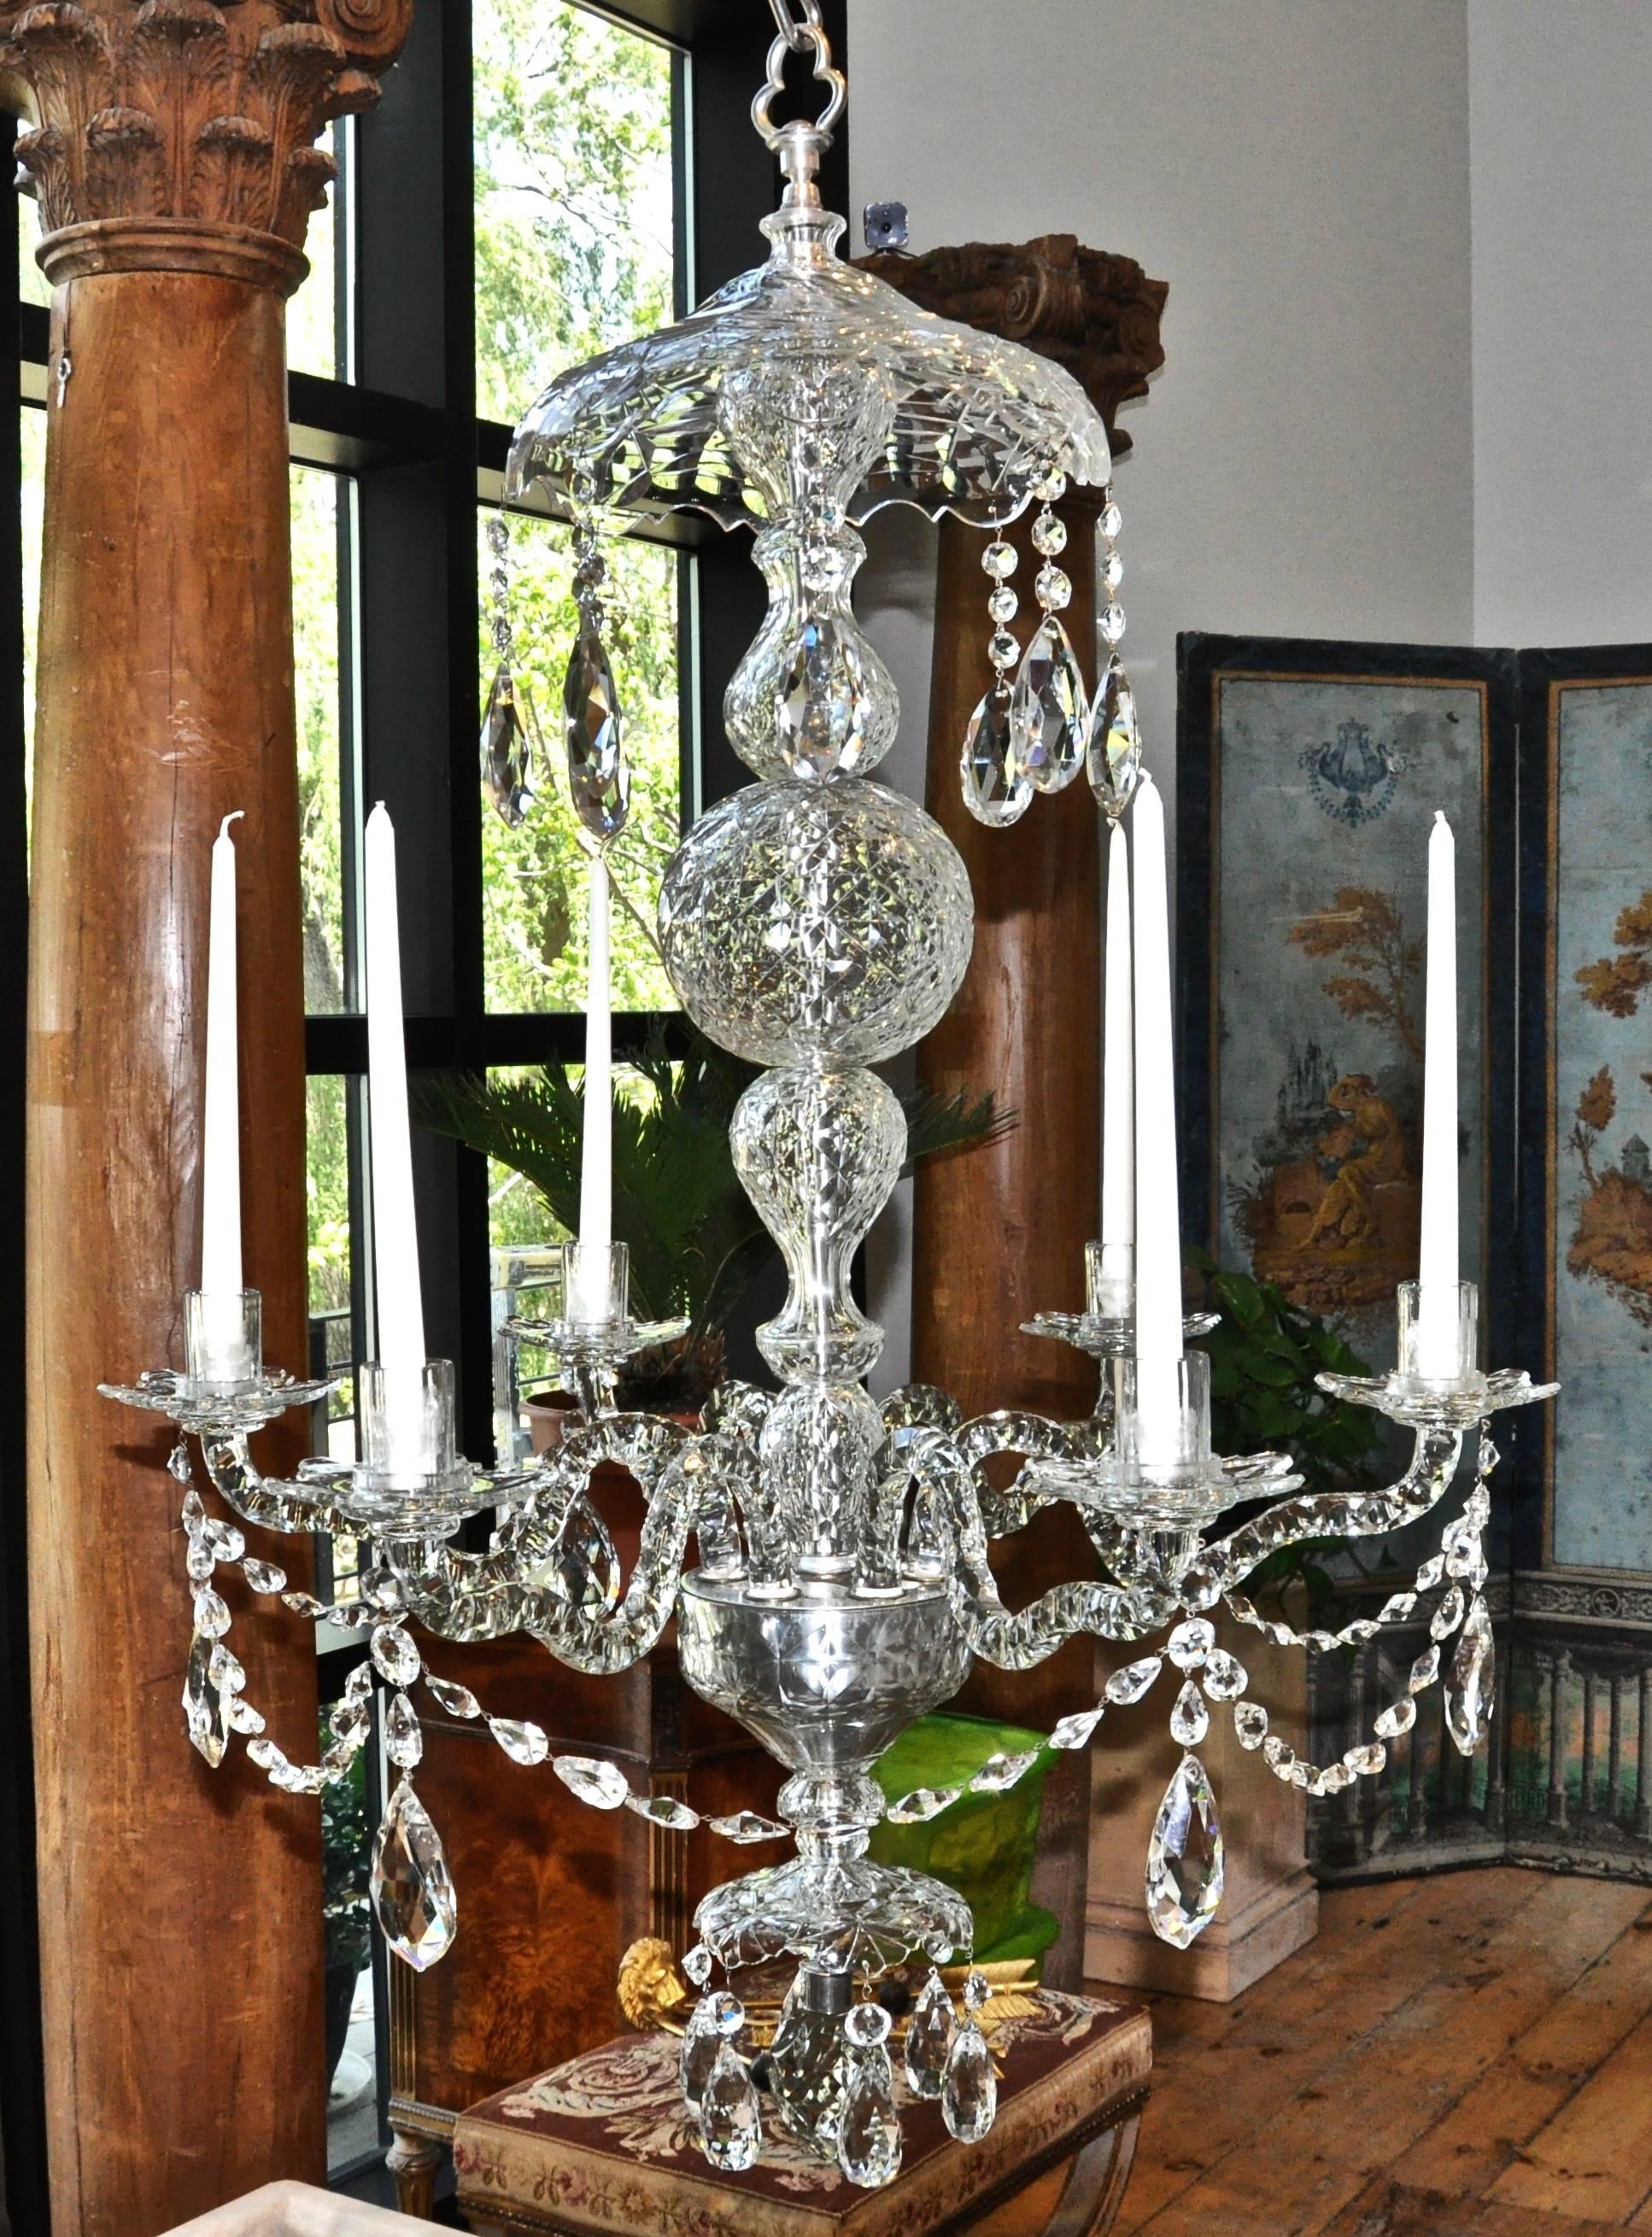 Irish cut-crystal chandelier of the Waterford area in Georgian style

- Early to mid-19th century
- Silvered brass fittings
- Exquisite cut and design
- In very good condition
- Now with candles but can be French wired at customer's